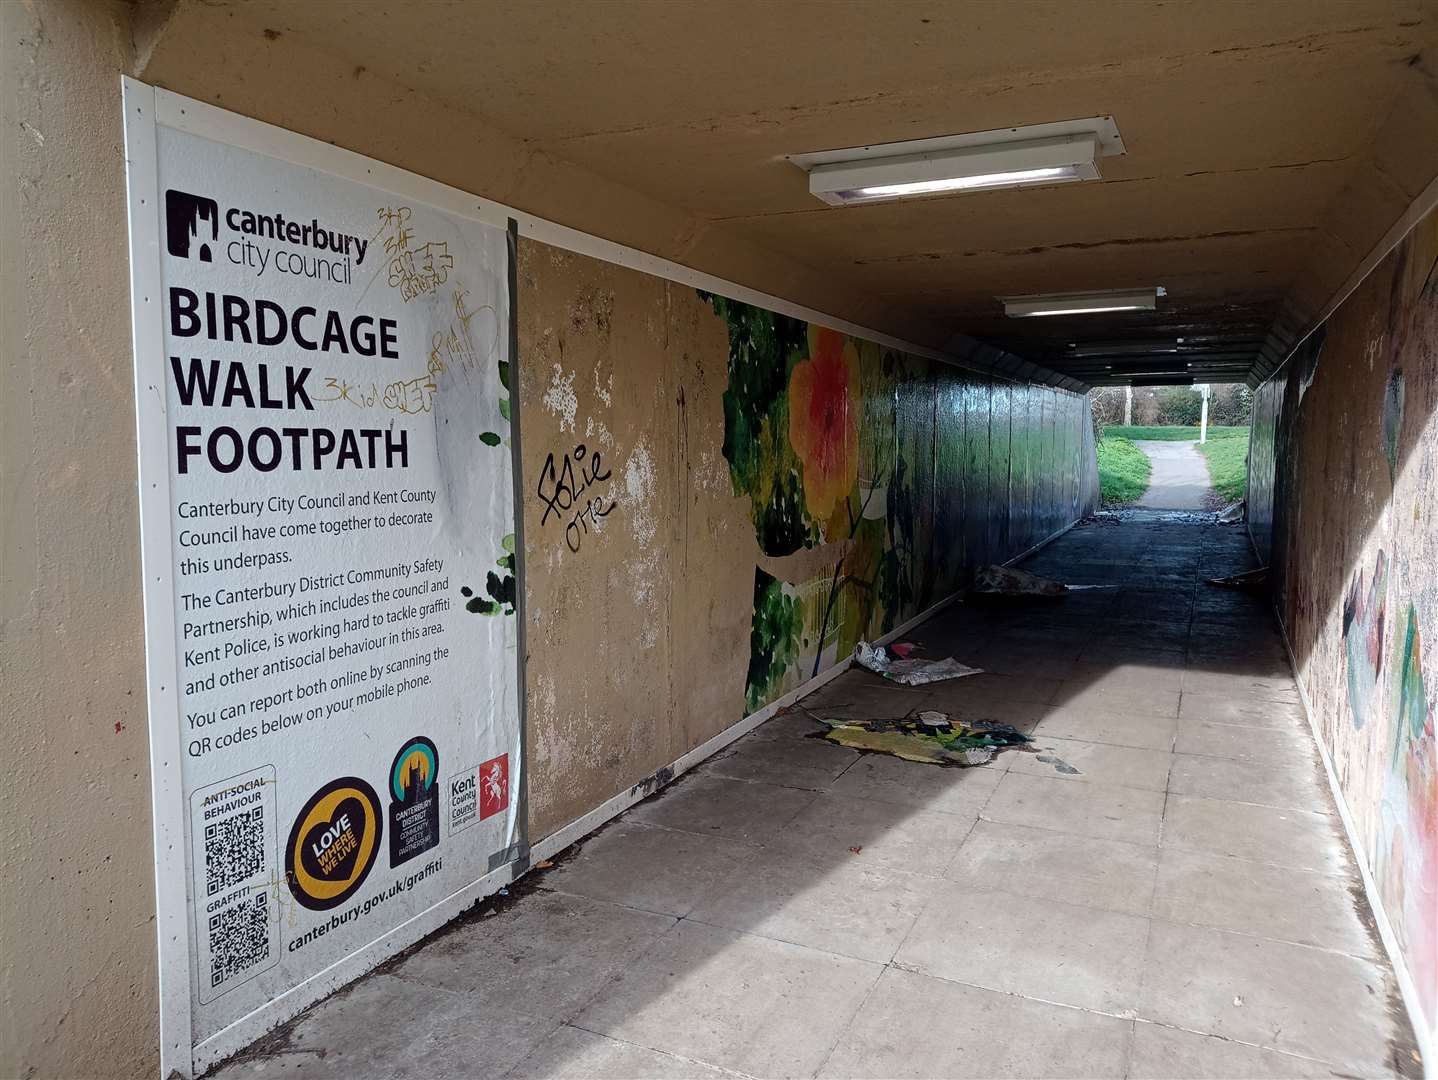 The decorative vinyl cover was installed in Birdcage Walk which leads to Hales Place in Canterbury